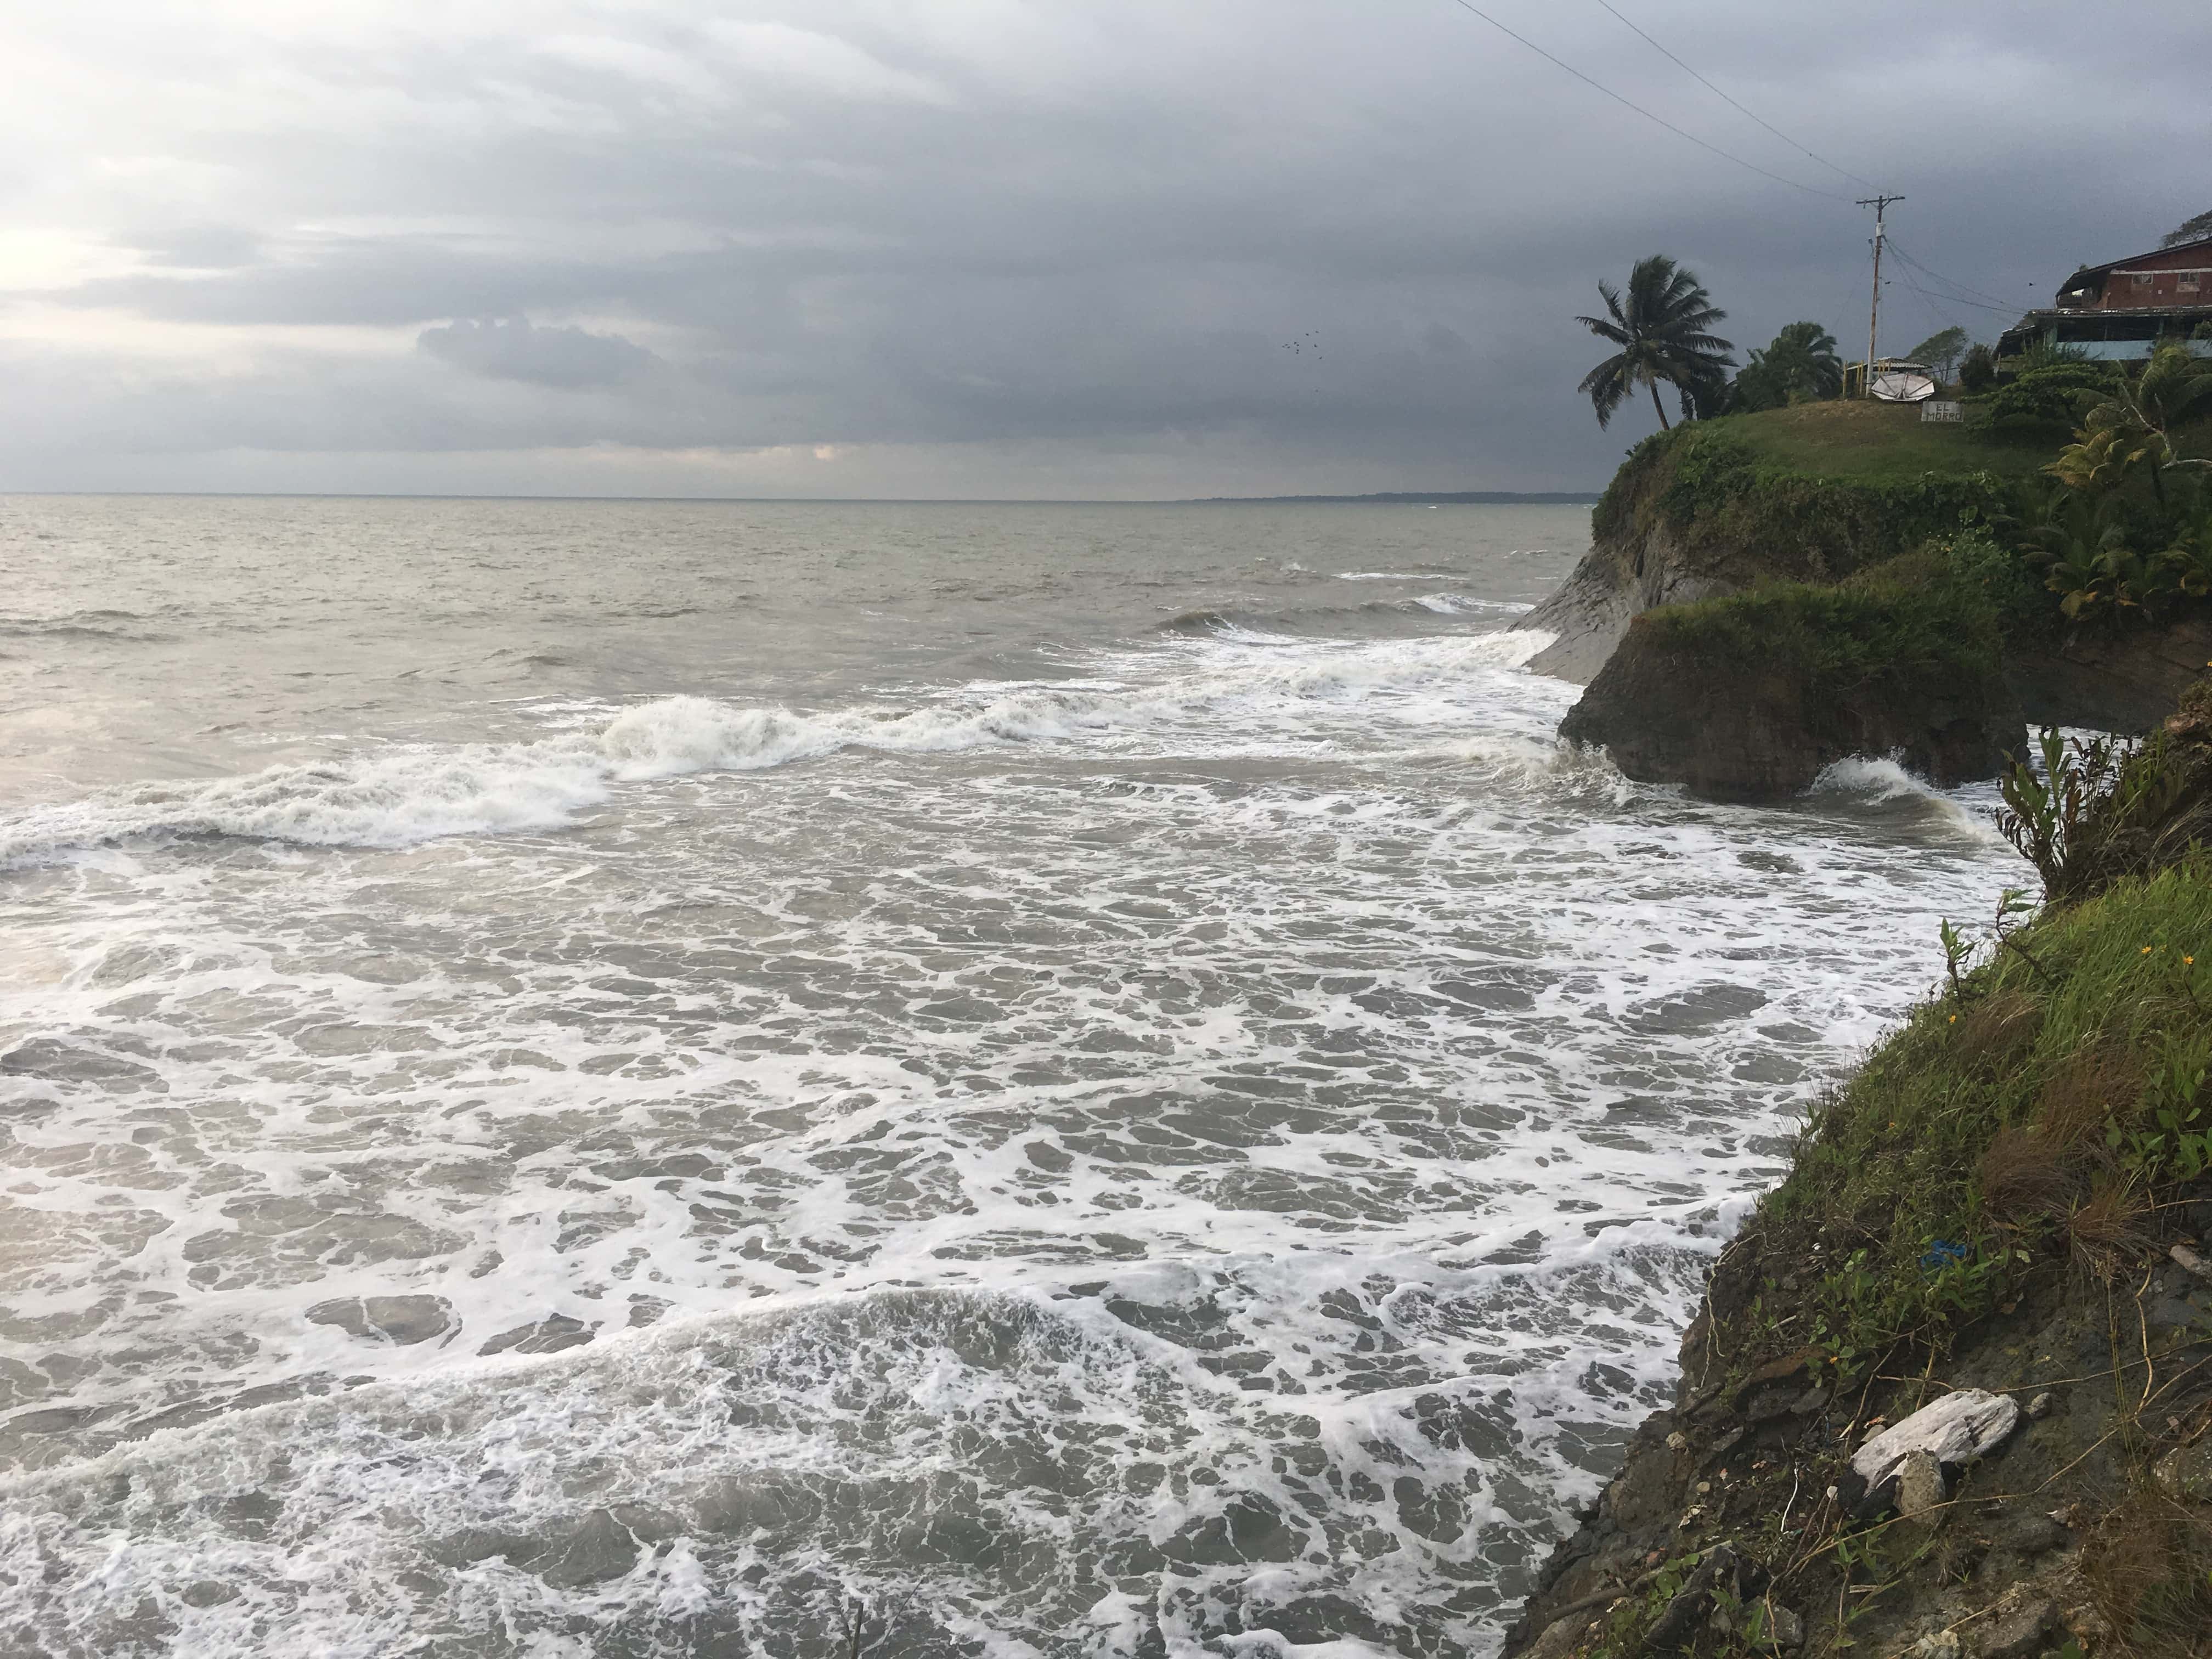 The beach at high tide in Ladrilleros, Valle del Cauca, Colombia